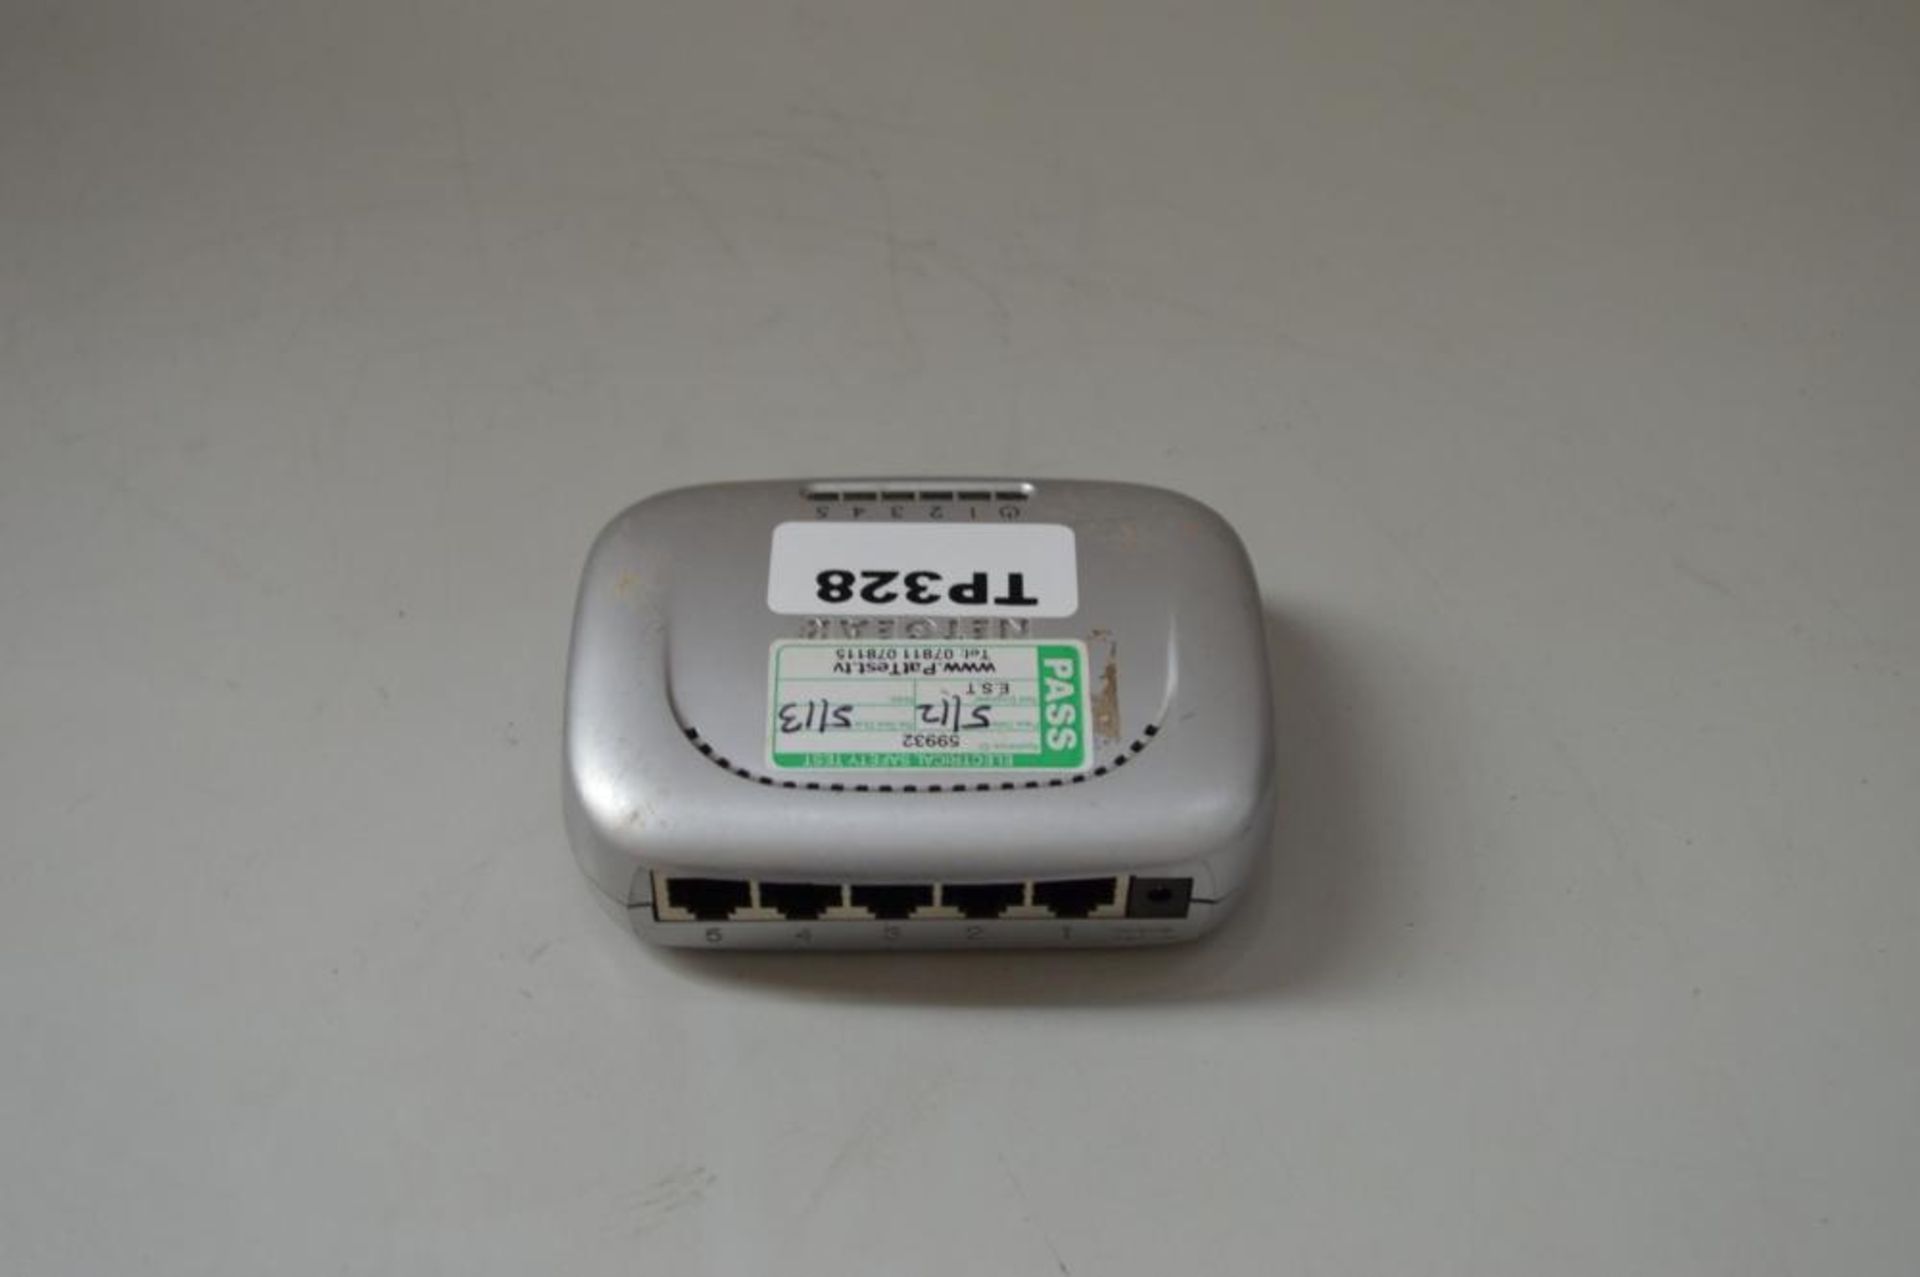 1 x Netgear Switch FS605 - Ref TP328 - CL394 - Location: Altrincham WA14 - HKPal4 As per our - Image 2 of 3